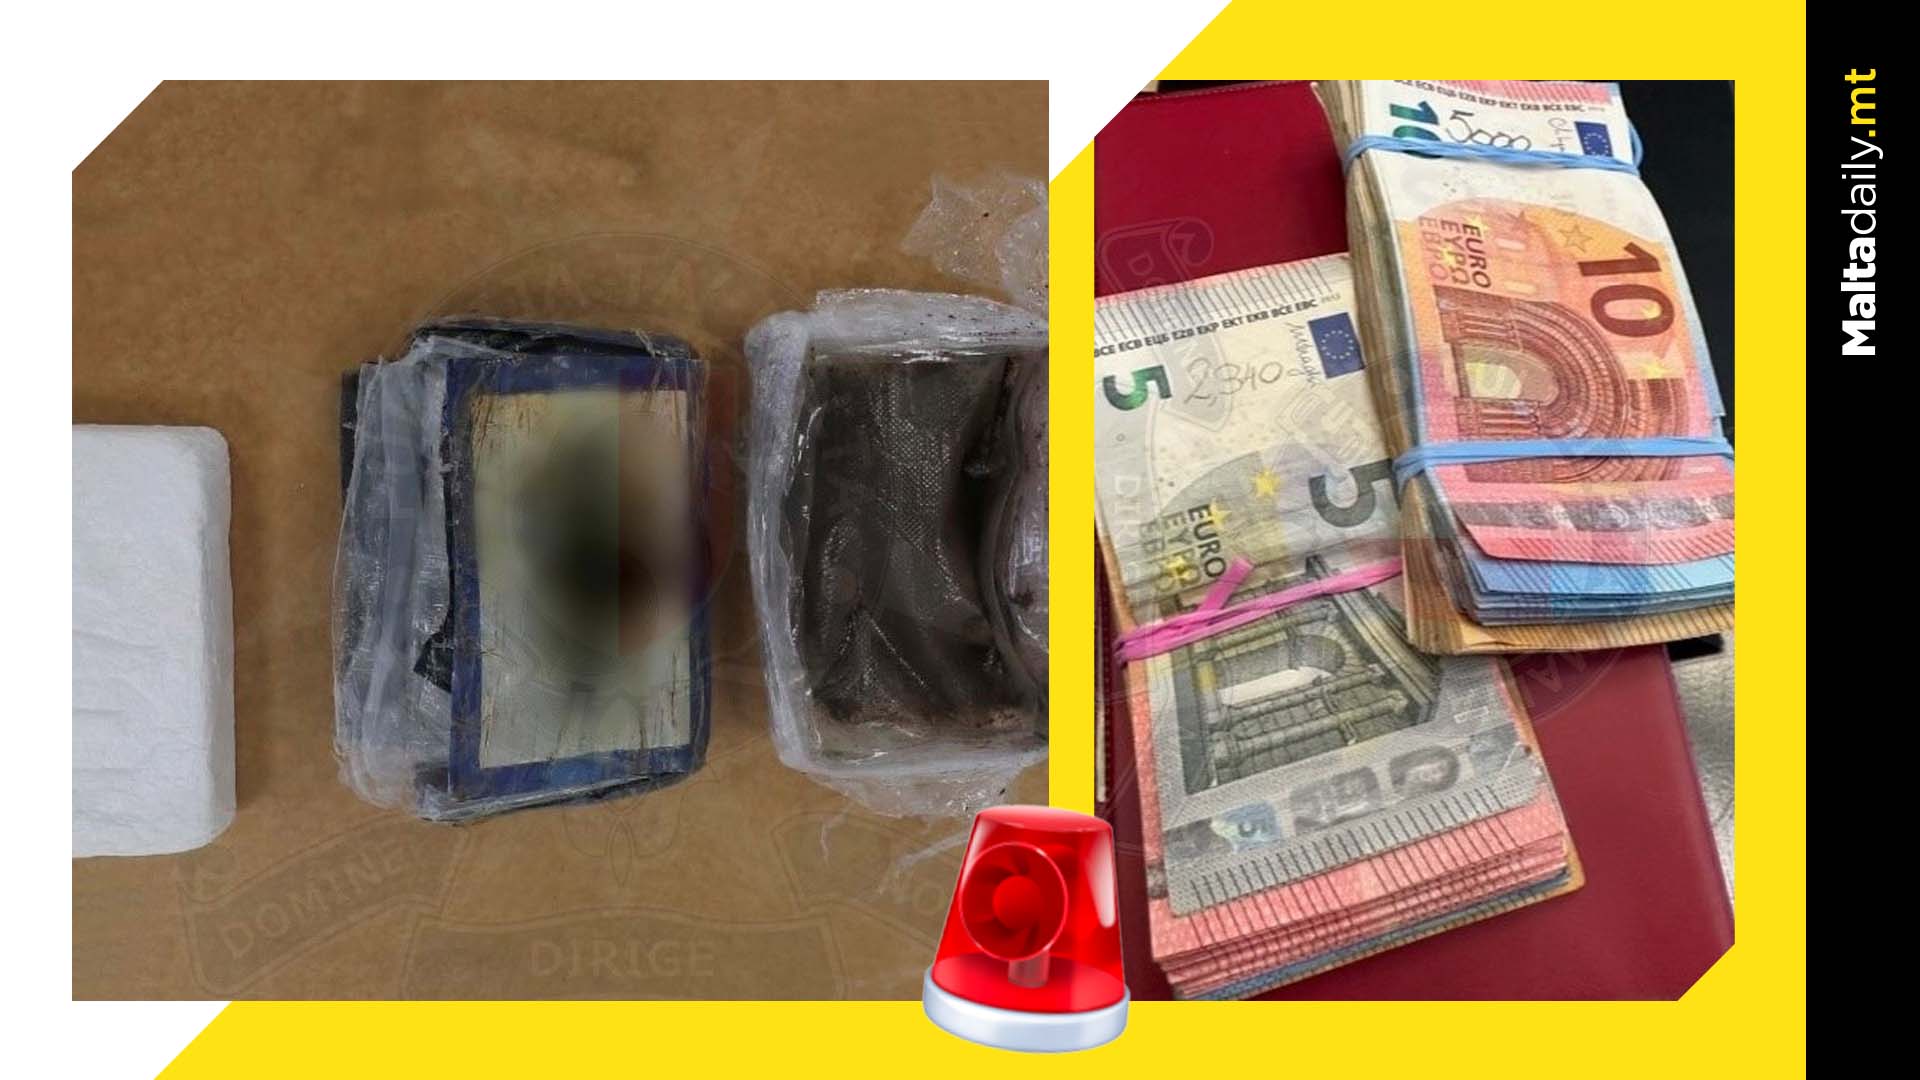 Drugs And Cocaine Confiscated In Pieta Police Operation